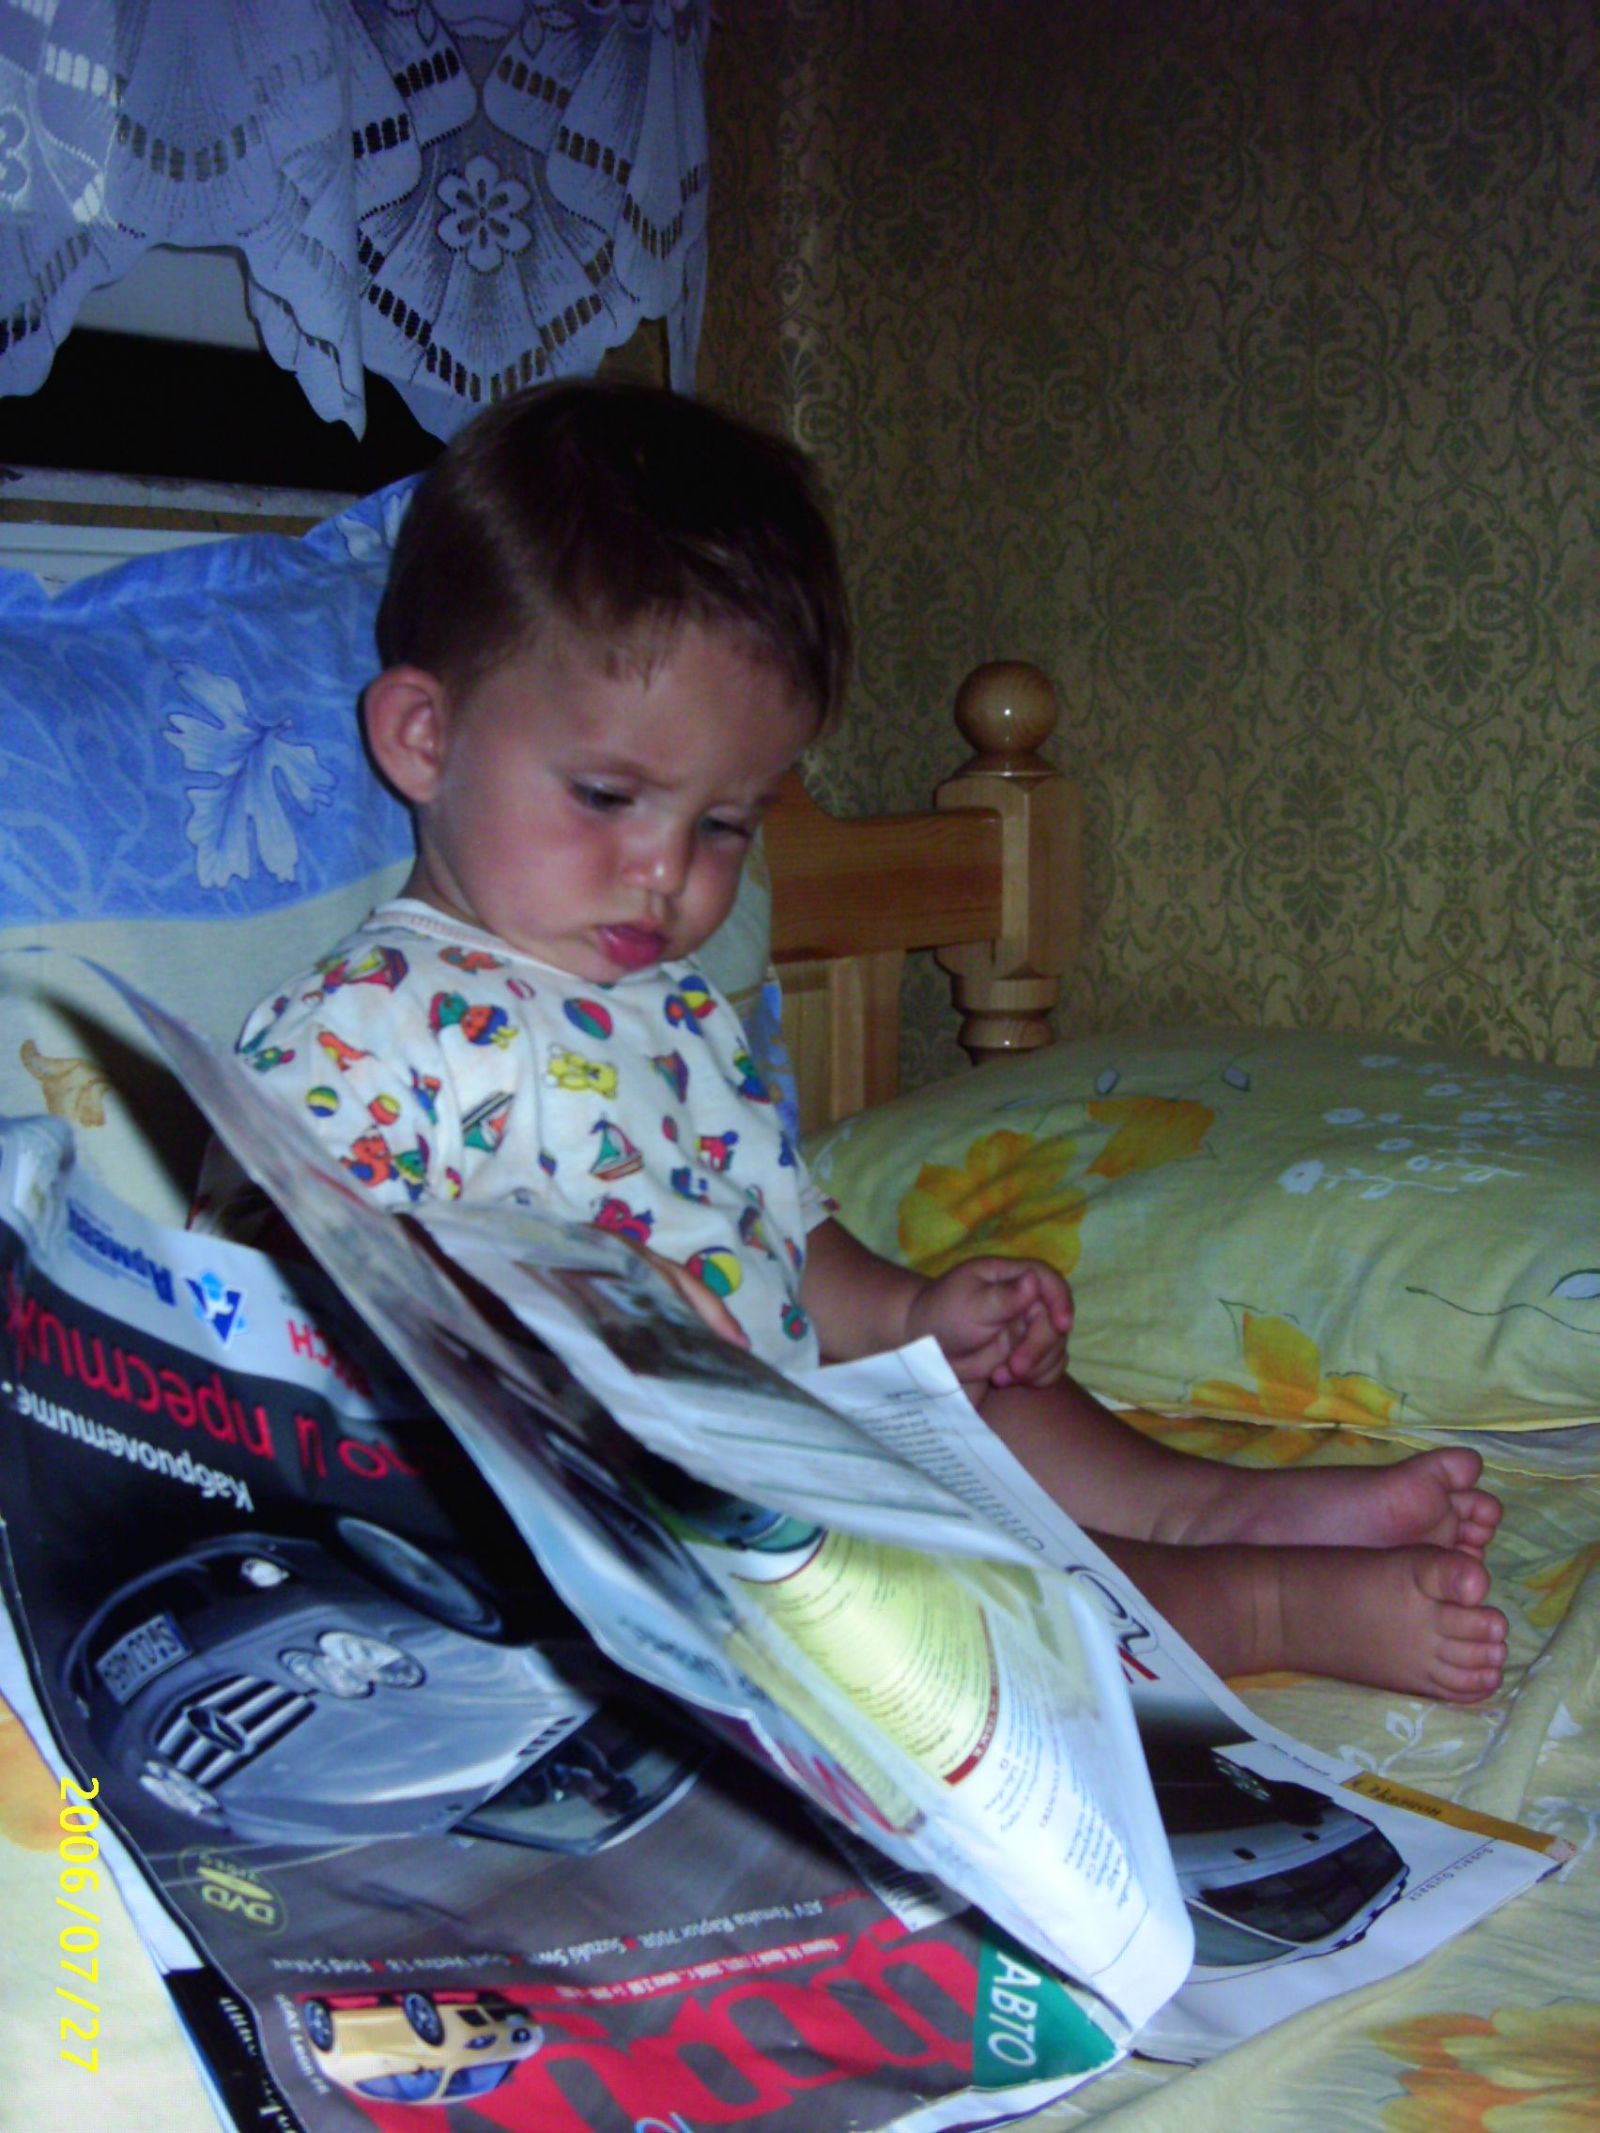 He is reading a magazine photo